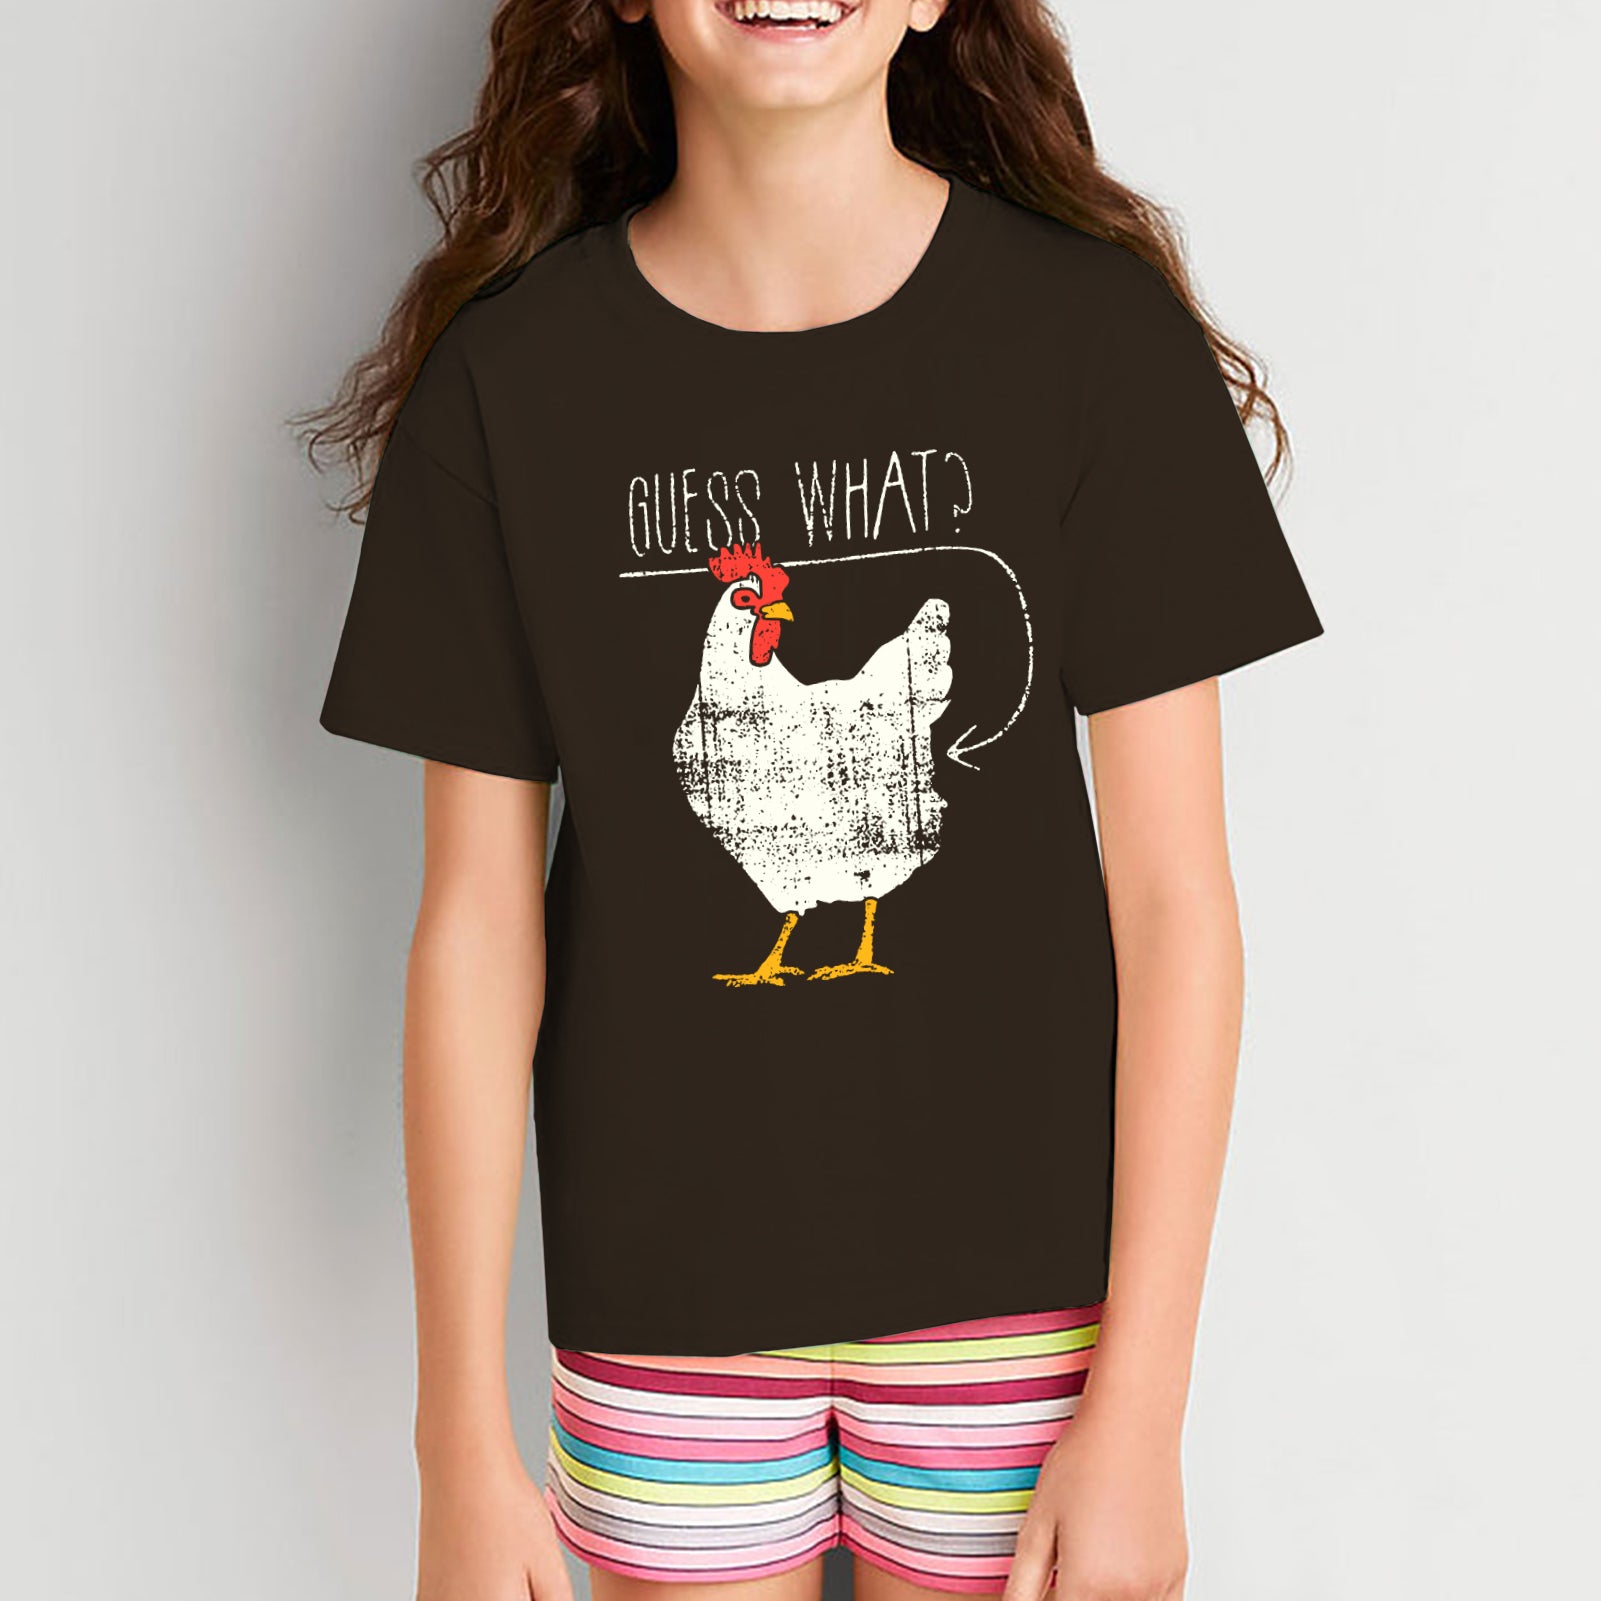 Guess What? Chicken Butt: T-Shirt - YOUTH - Dark Chocolate - UGP